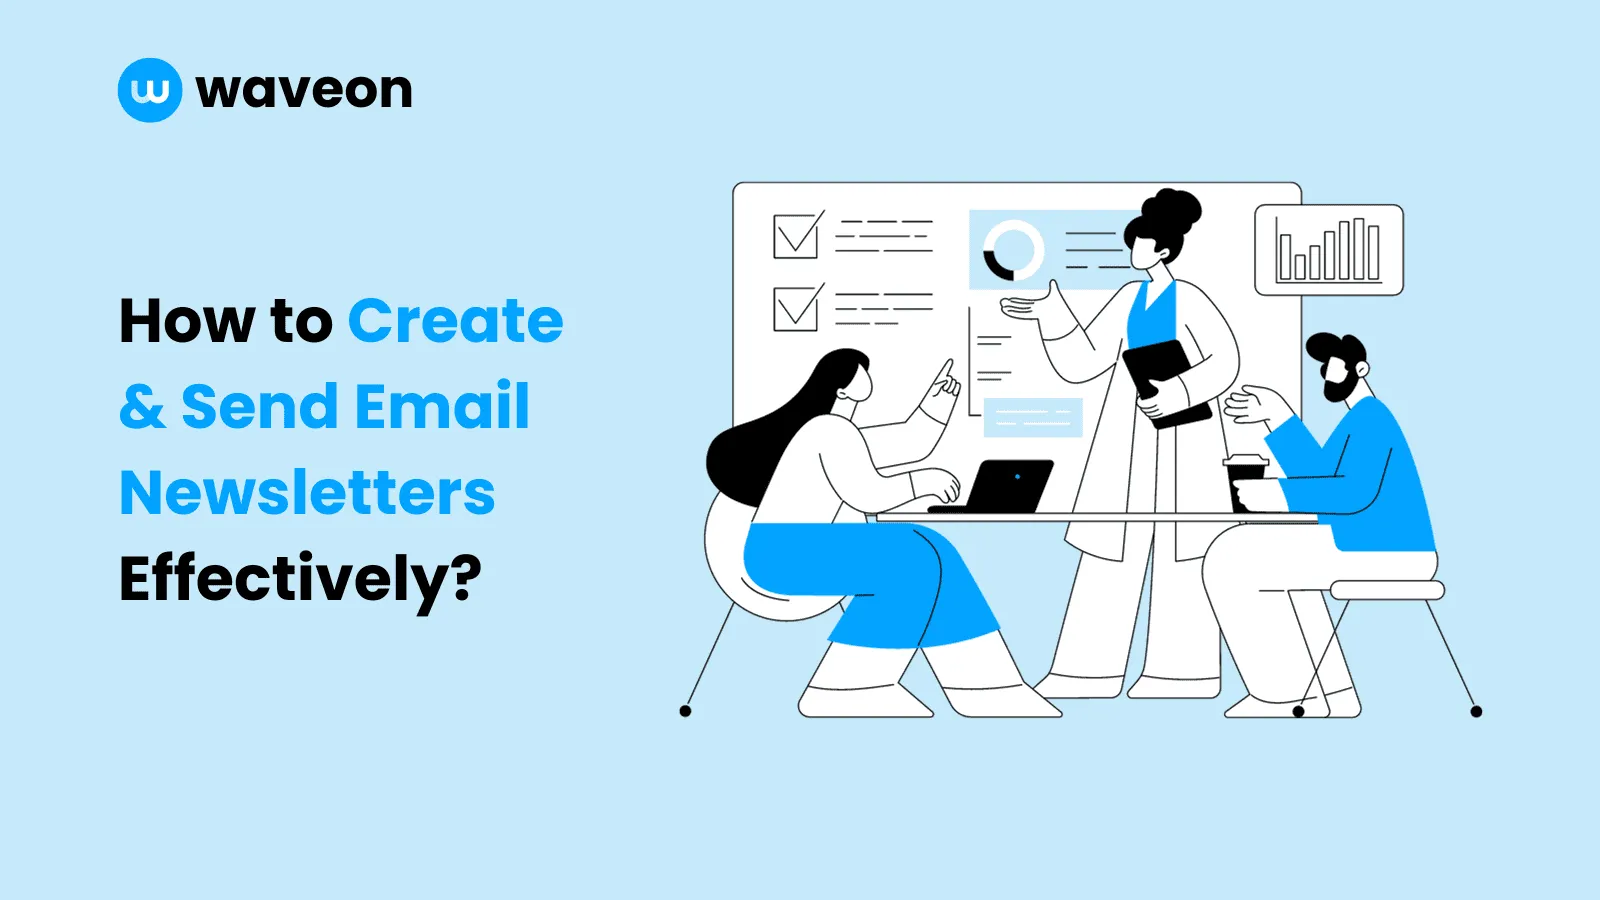 How to Create & Send Email Newsletters Effectively